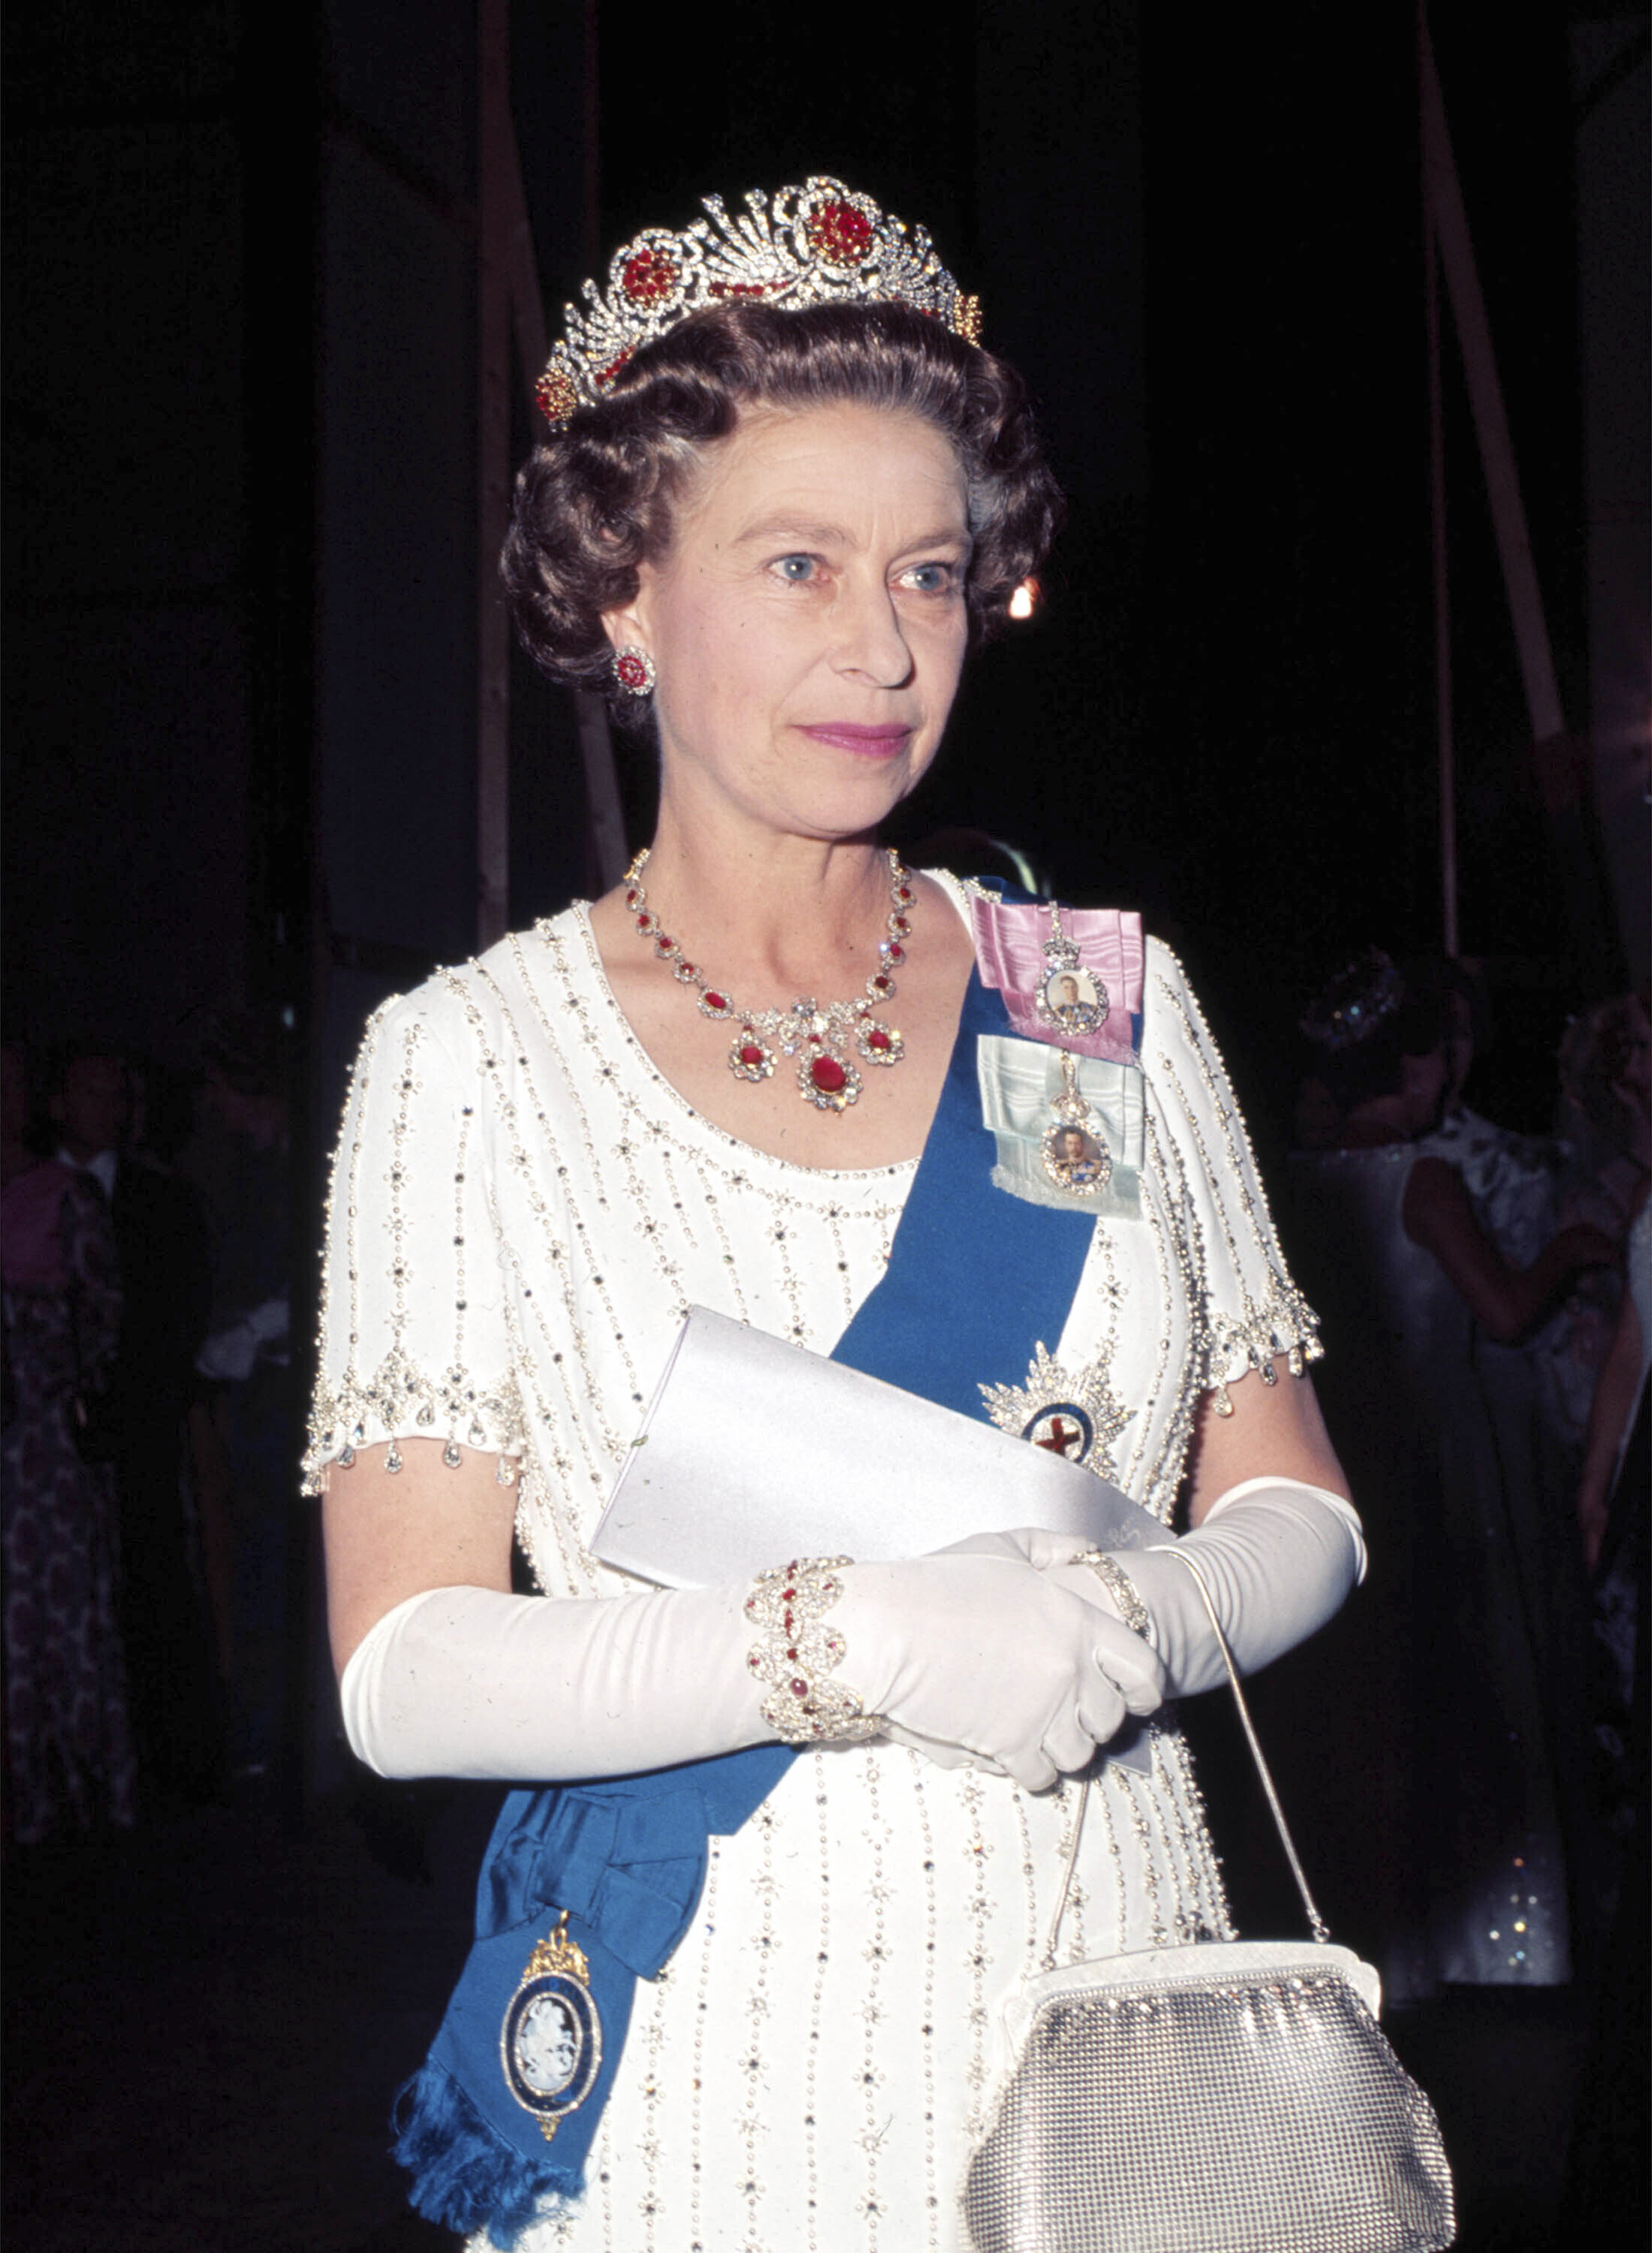 Britain's Queen Elizabeth II, attends a performance of the Royal Ballet at the Covent Garden Opera House, London, May 30, 1977. (AP Photo/Pool)